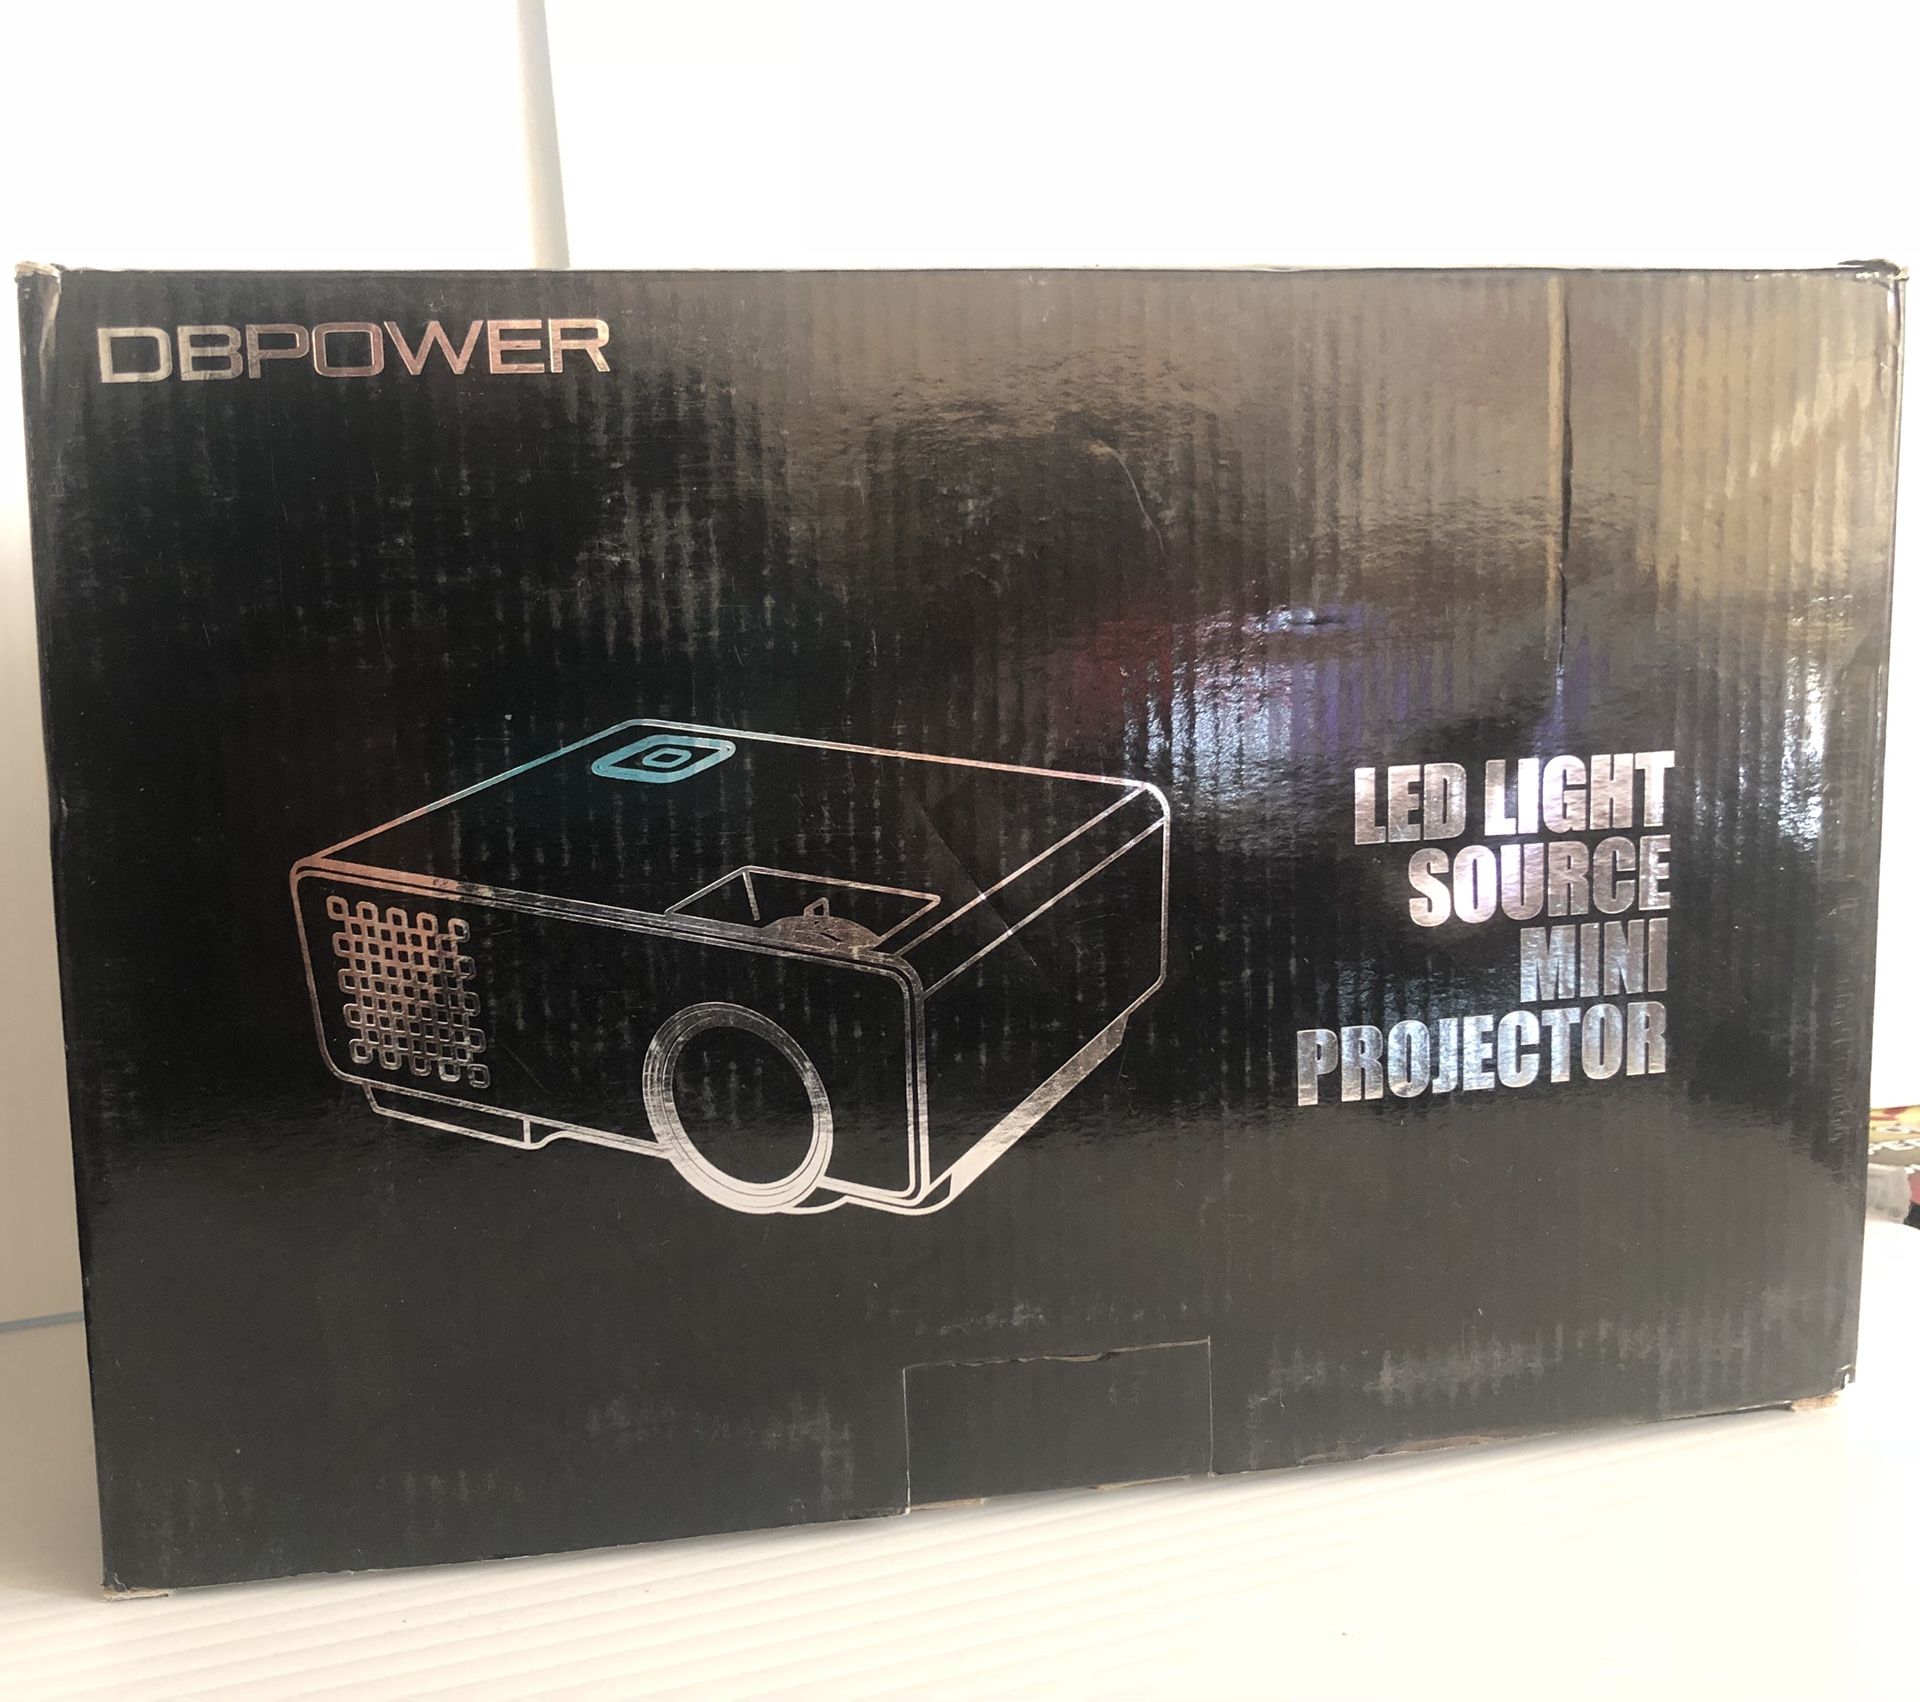 DBPOWER Upgraded DBPOWER T20 LCD Mini Movie Projector +10% Brighter, Multimedia Home Theater Video Projector with HDMI Cable, Support 1080P HDMI USB